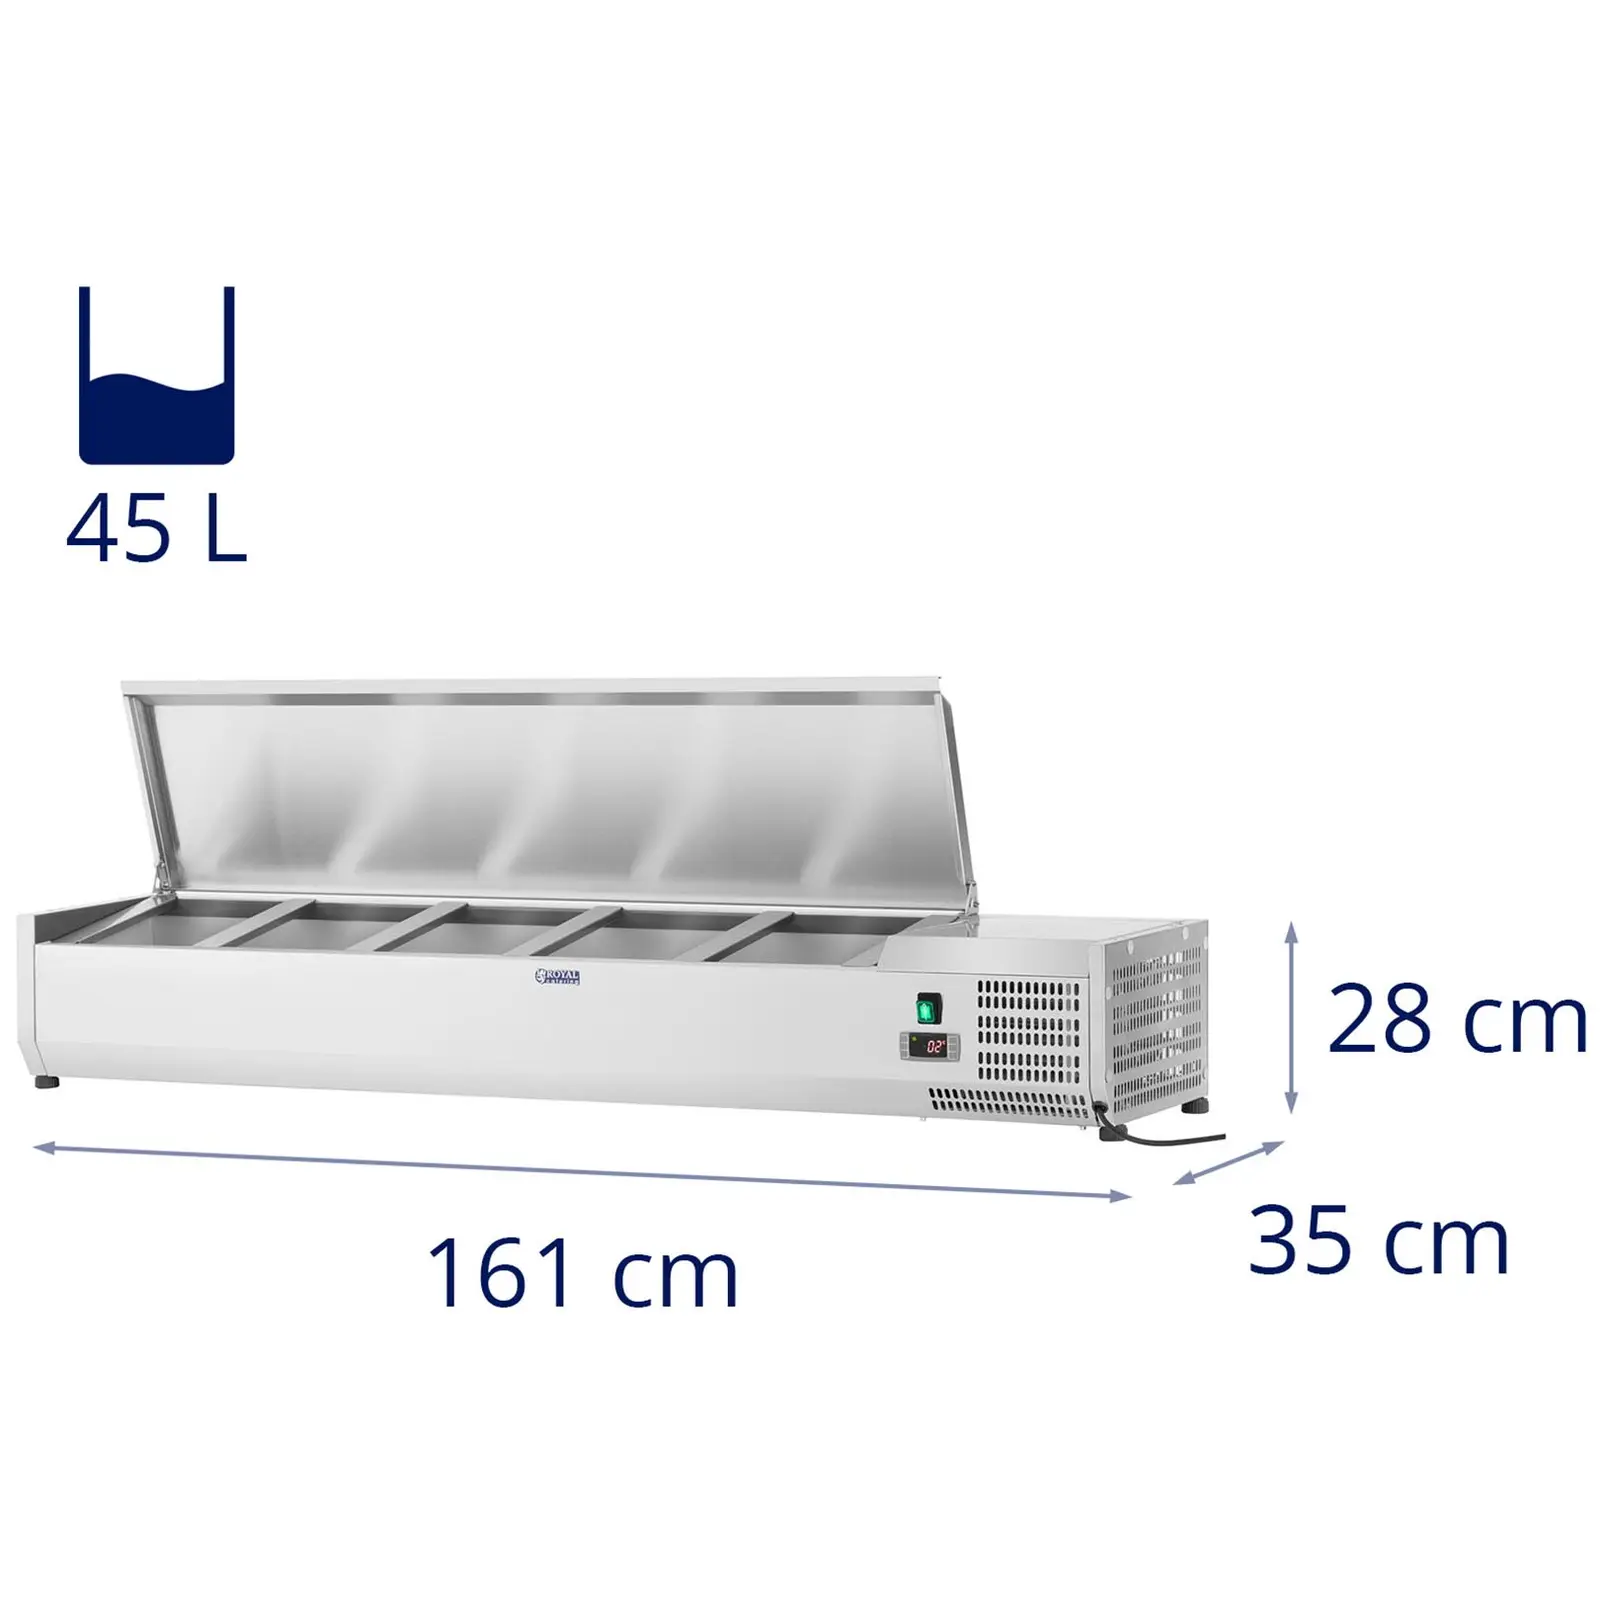 Countertop Refrigerated Display Case - 160 x 33 cm - 8 GN 1/4 Containers